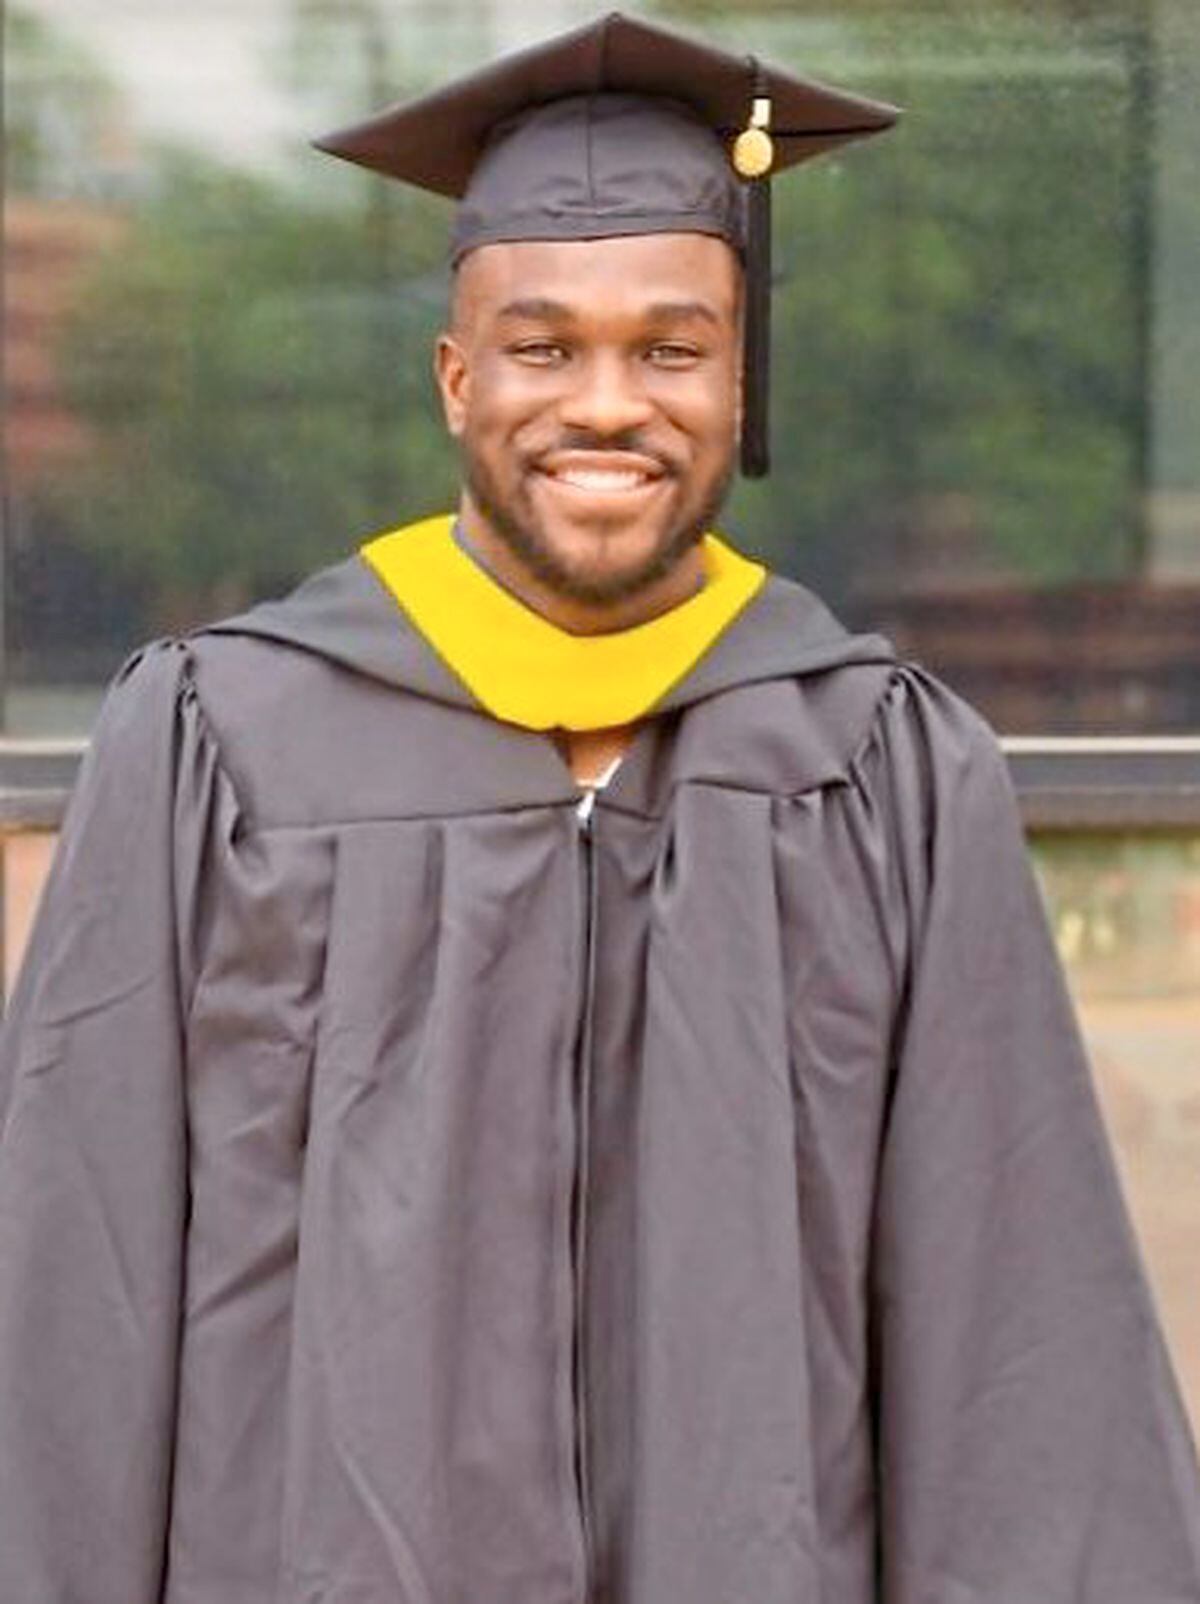 Daryl Dike has been working hard on and off the pitch, earning a degree